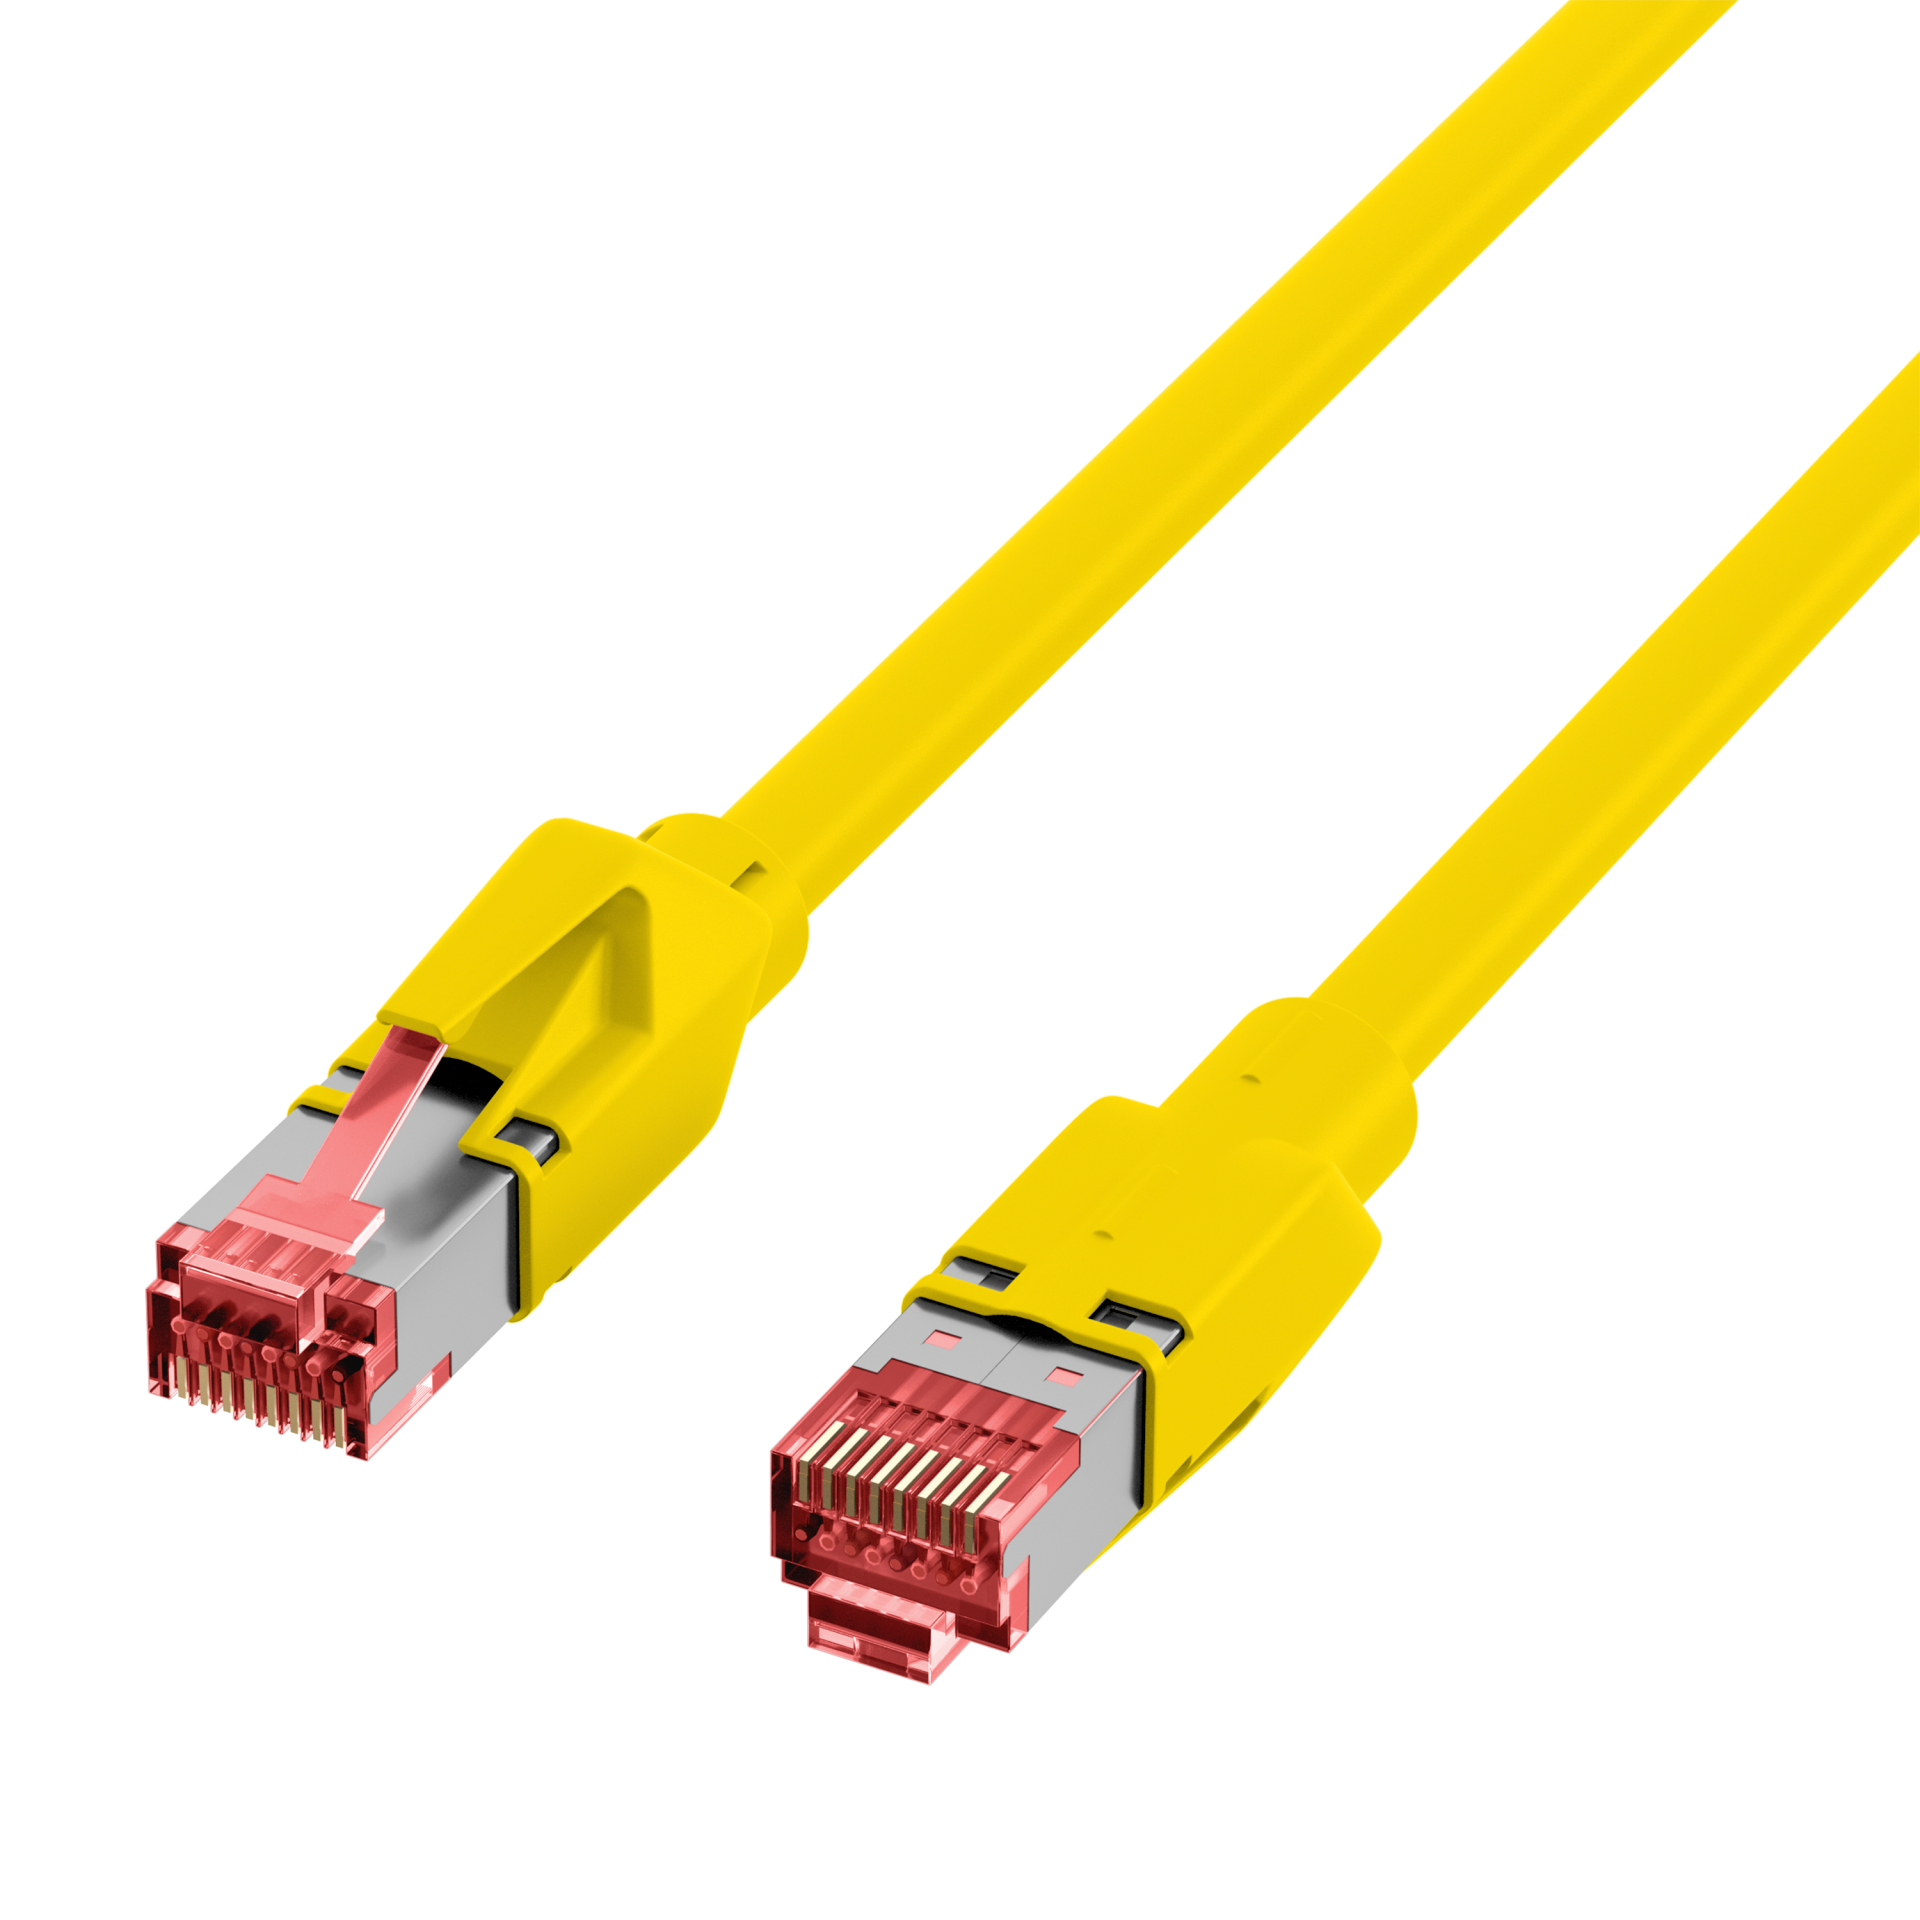 RJ45 Patch Cord Cat.5e S/UTP PUR TM21 for drag chains yellow 30m